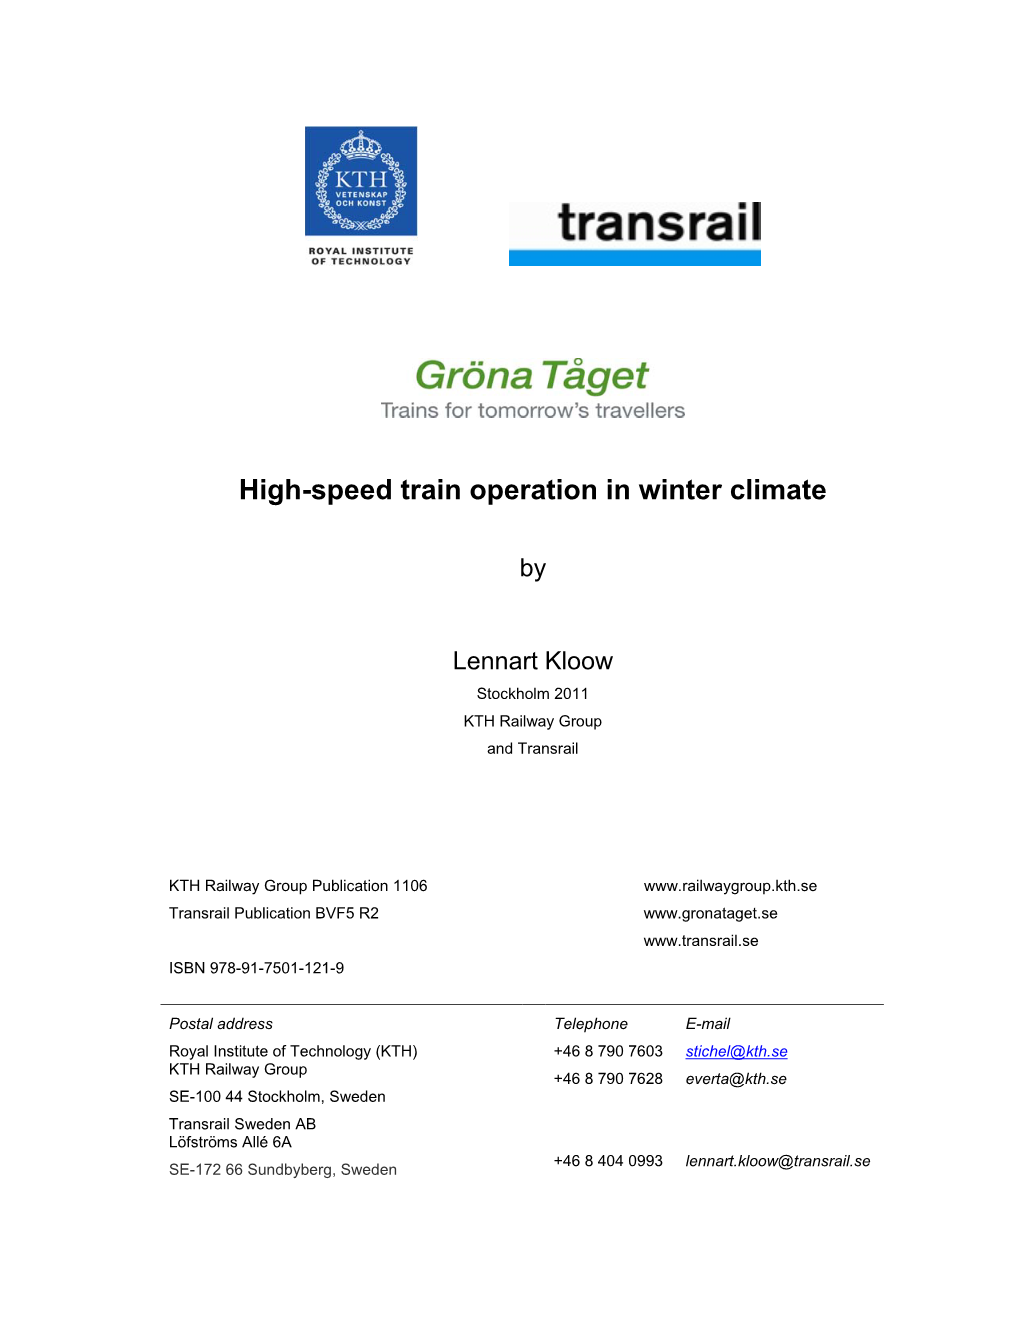 High-Speed Train Operation in Winter Climate